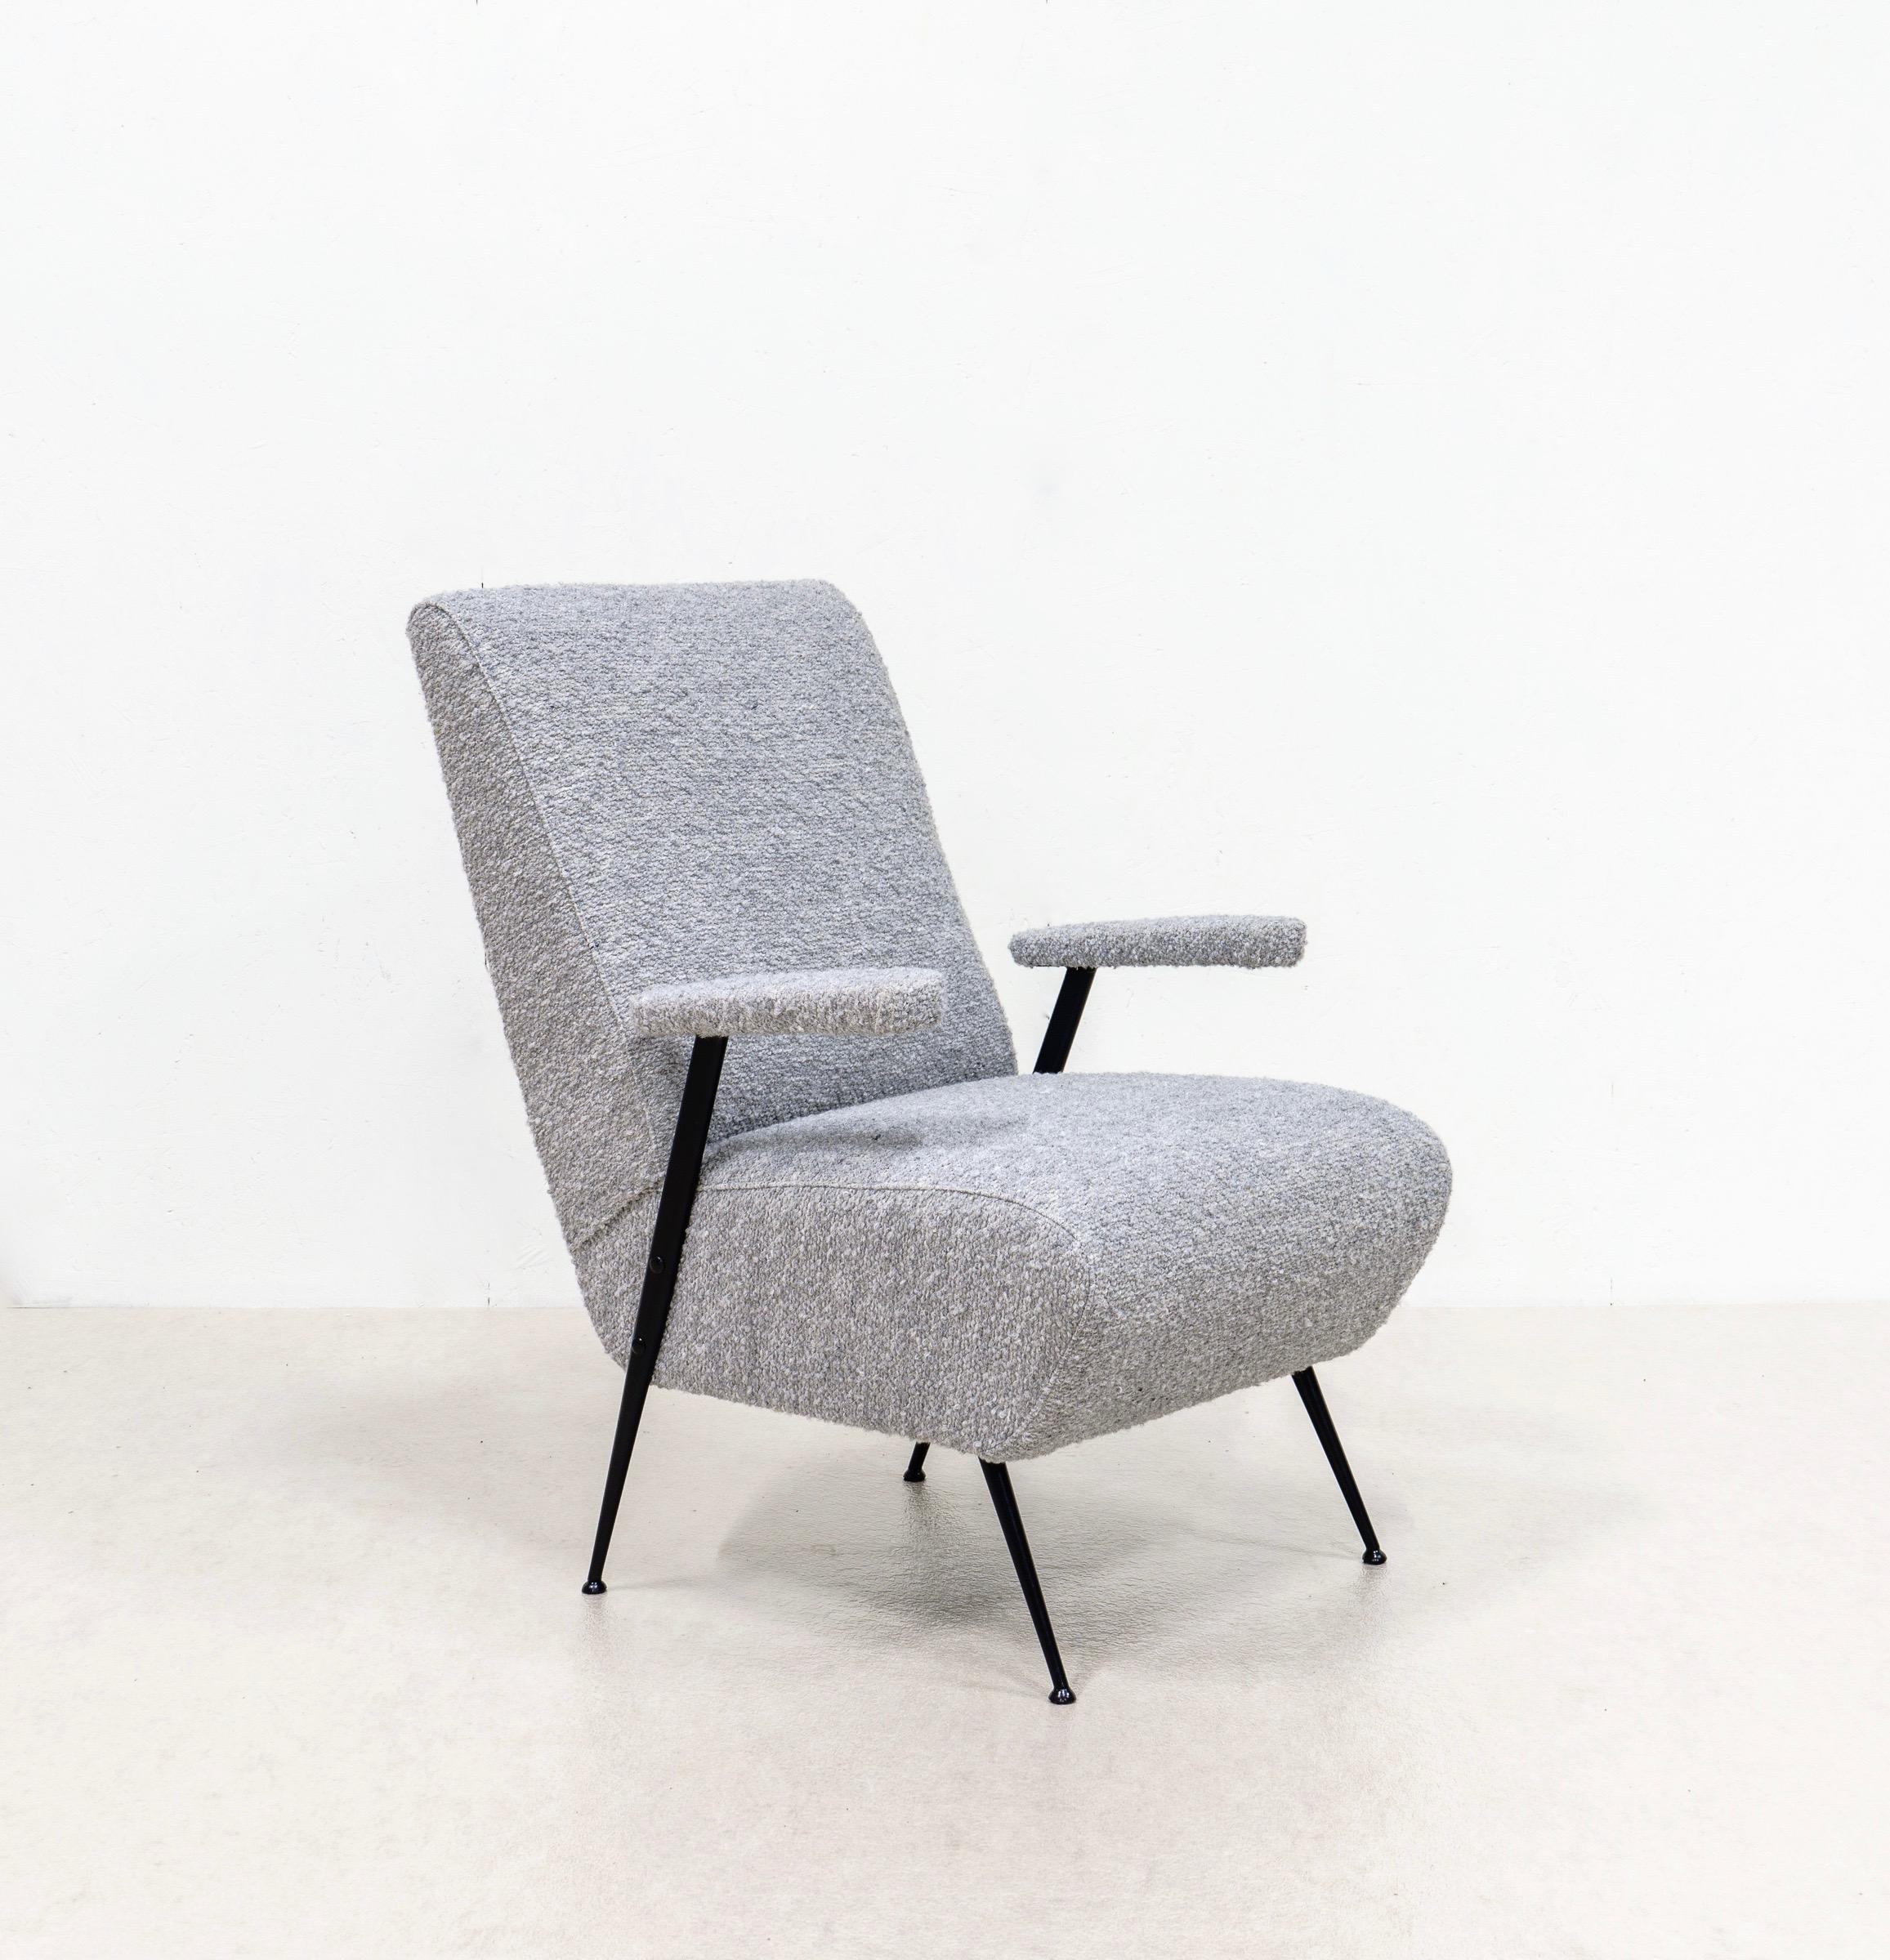 This pair of armchairs is very confortable and newly upholstered with a nice grey curly wool.